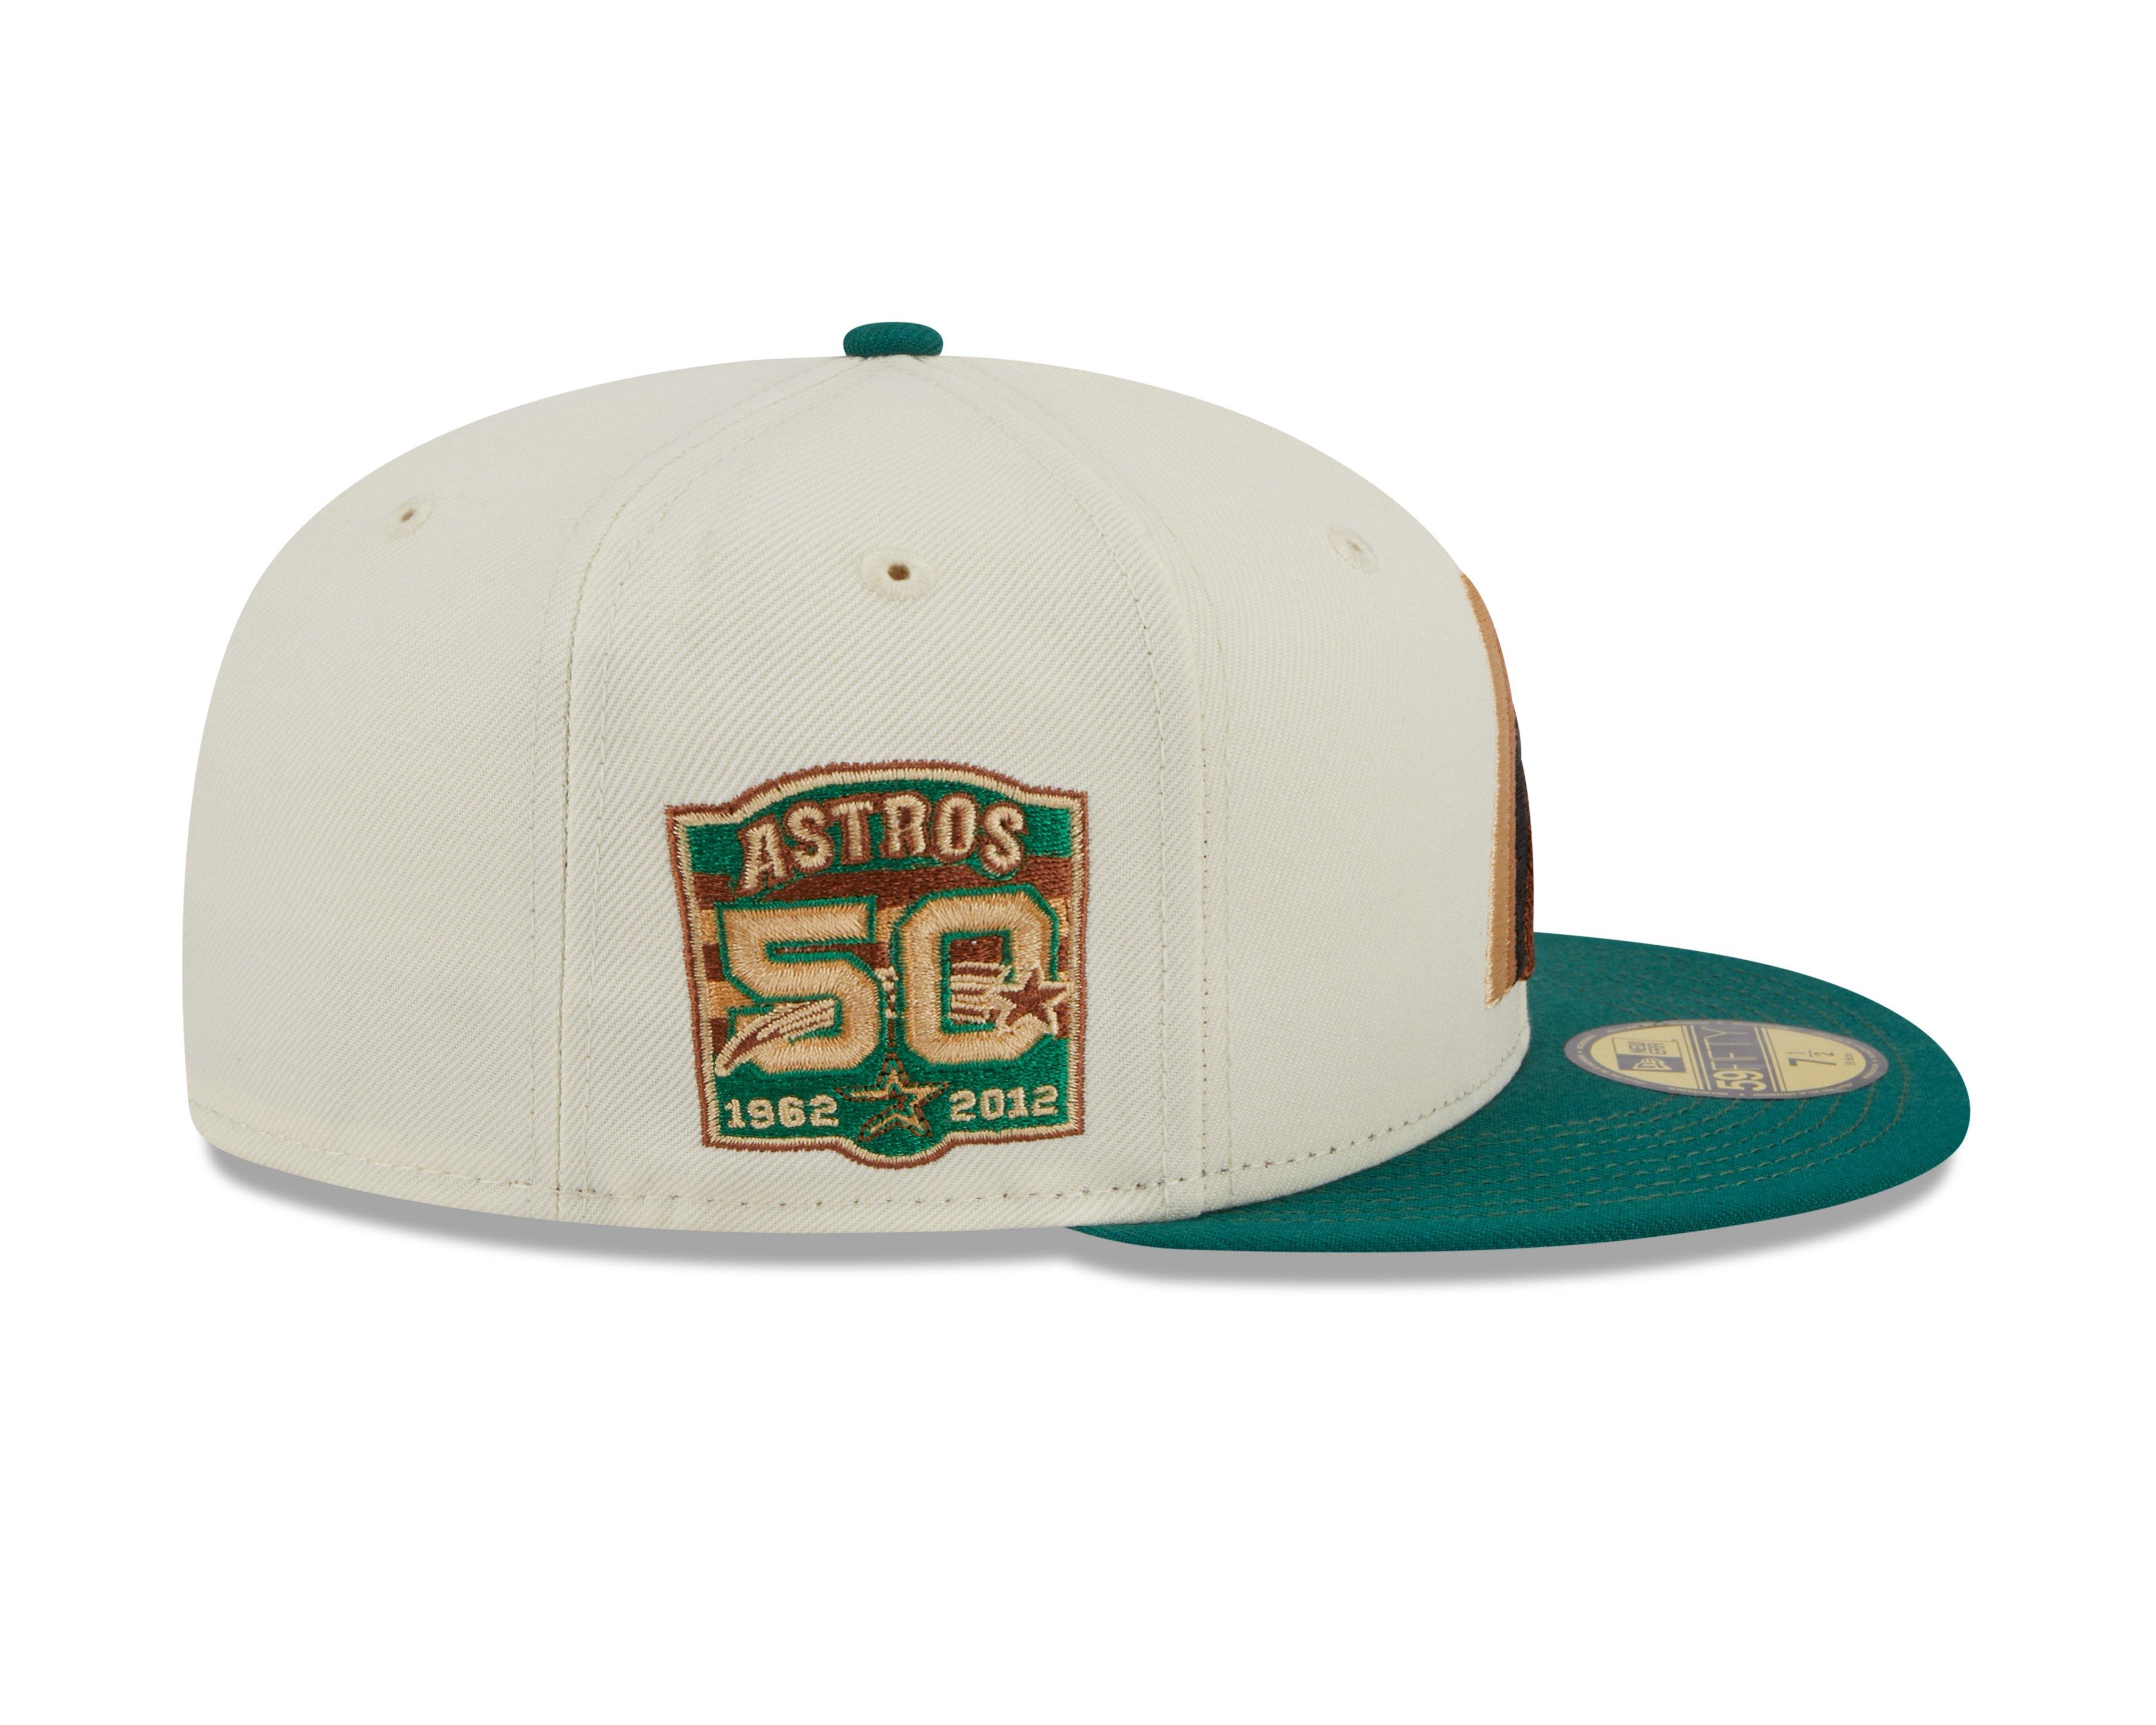 New Era Houston Astros 59FIFTY Tri-Color Logo Fitted Hat - Hibbett